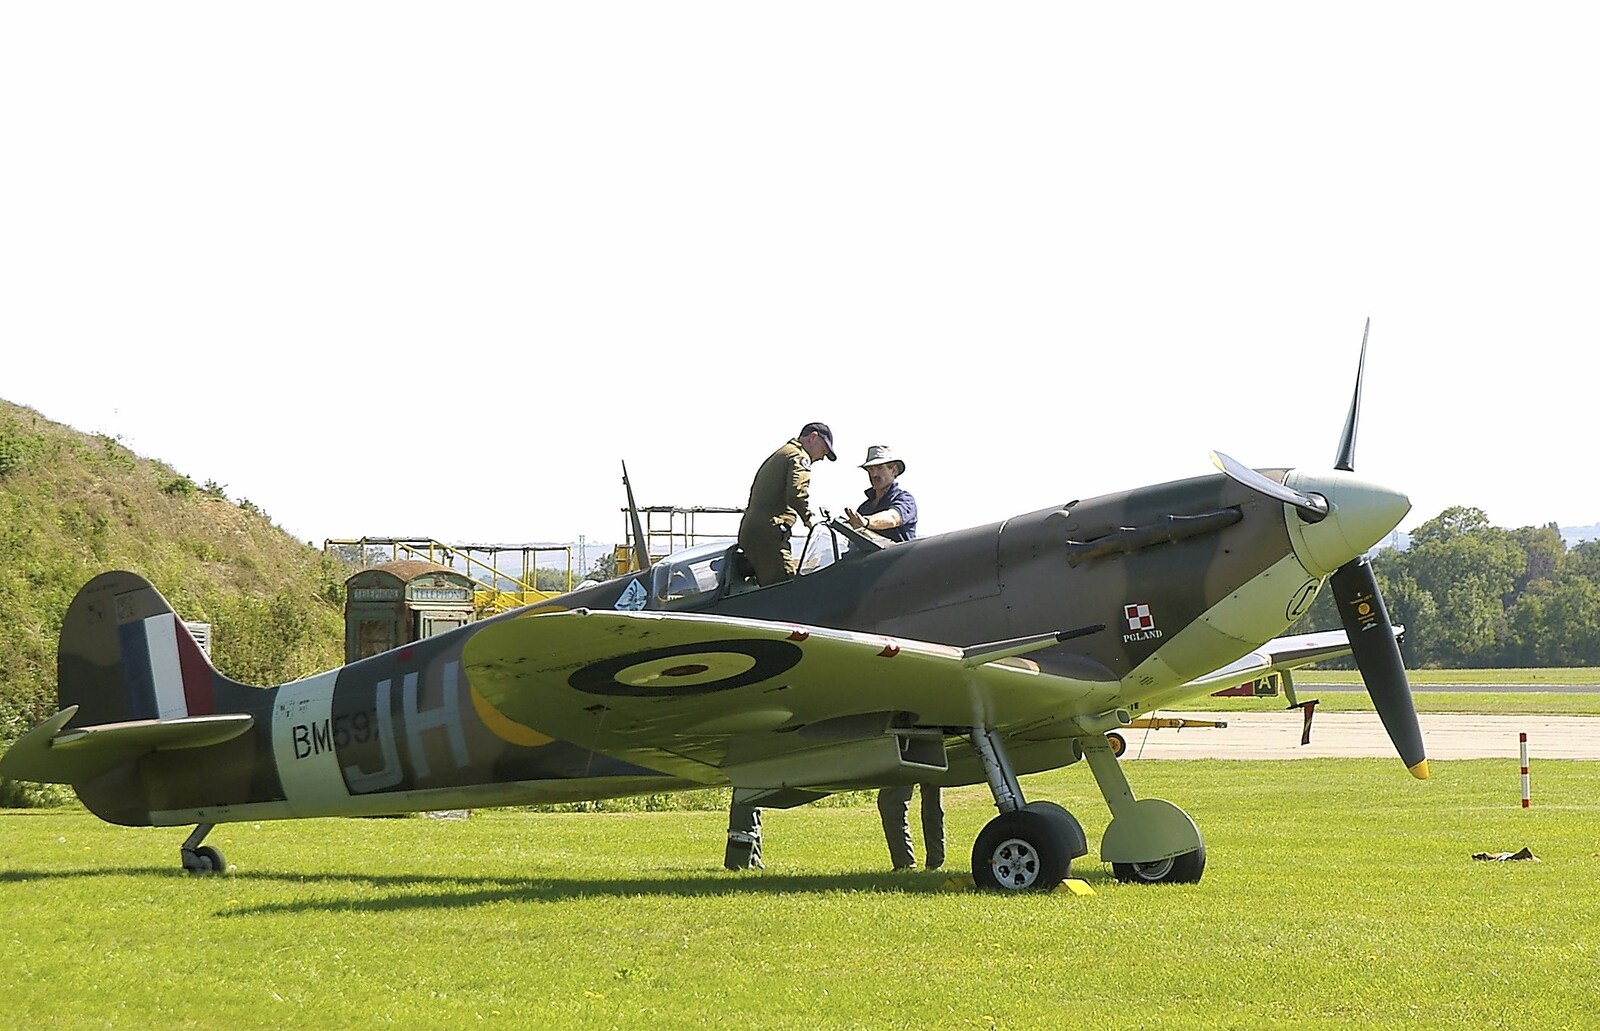 Spitfire JH-C, on the ground at Cambridge Airport from Grantchester Meadows, Alex Hill at Revs and Spitfires - 10th September 2006